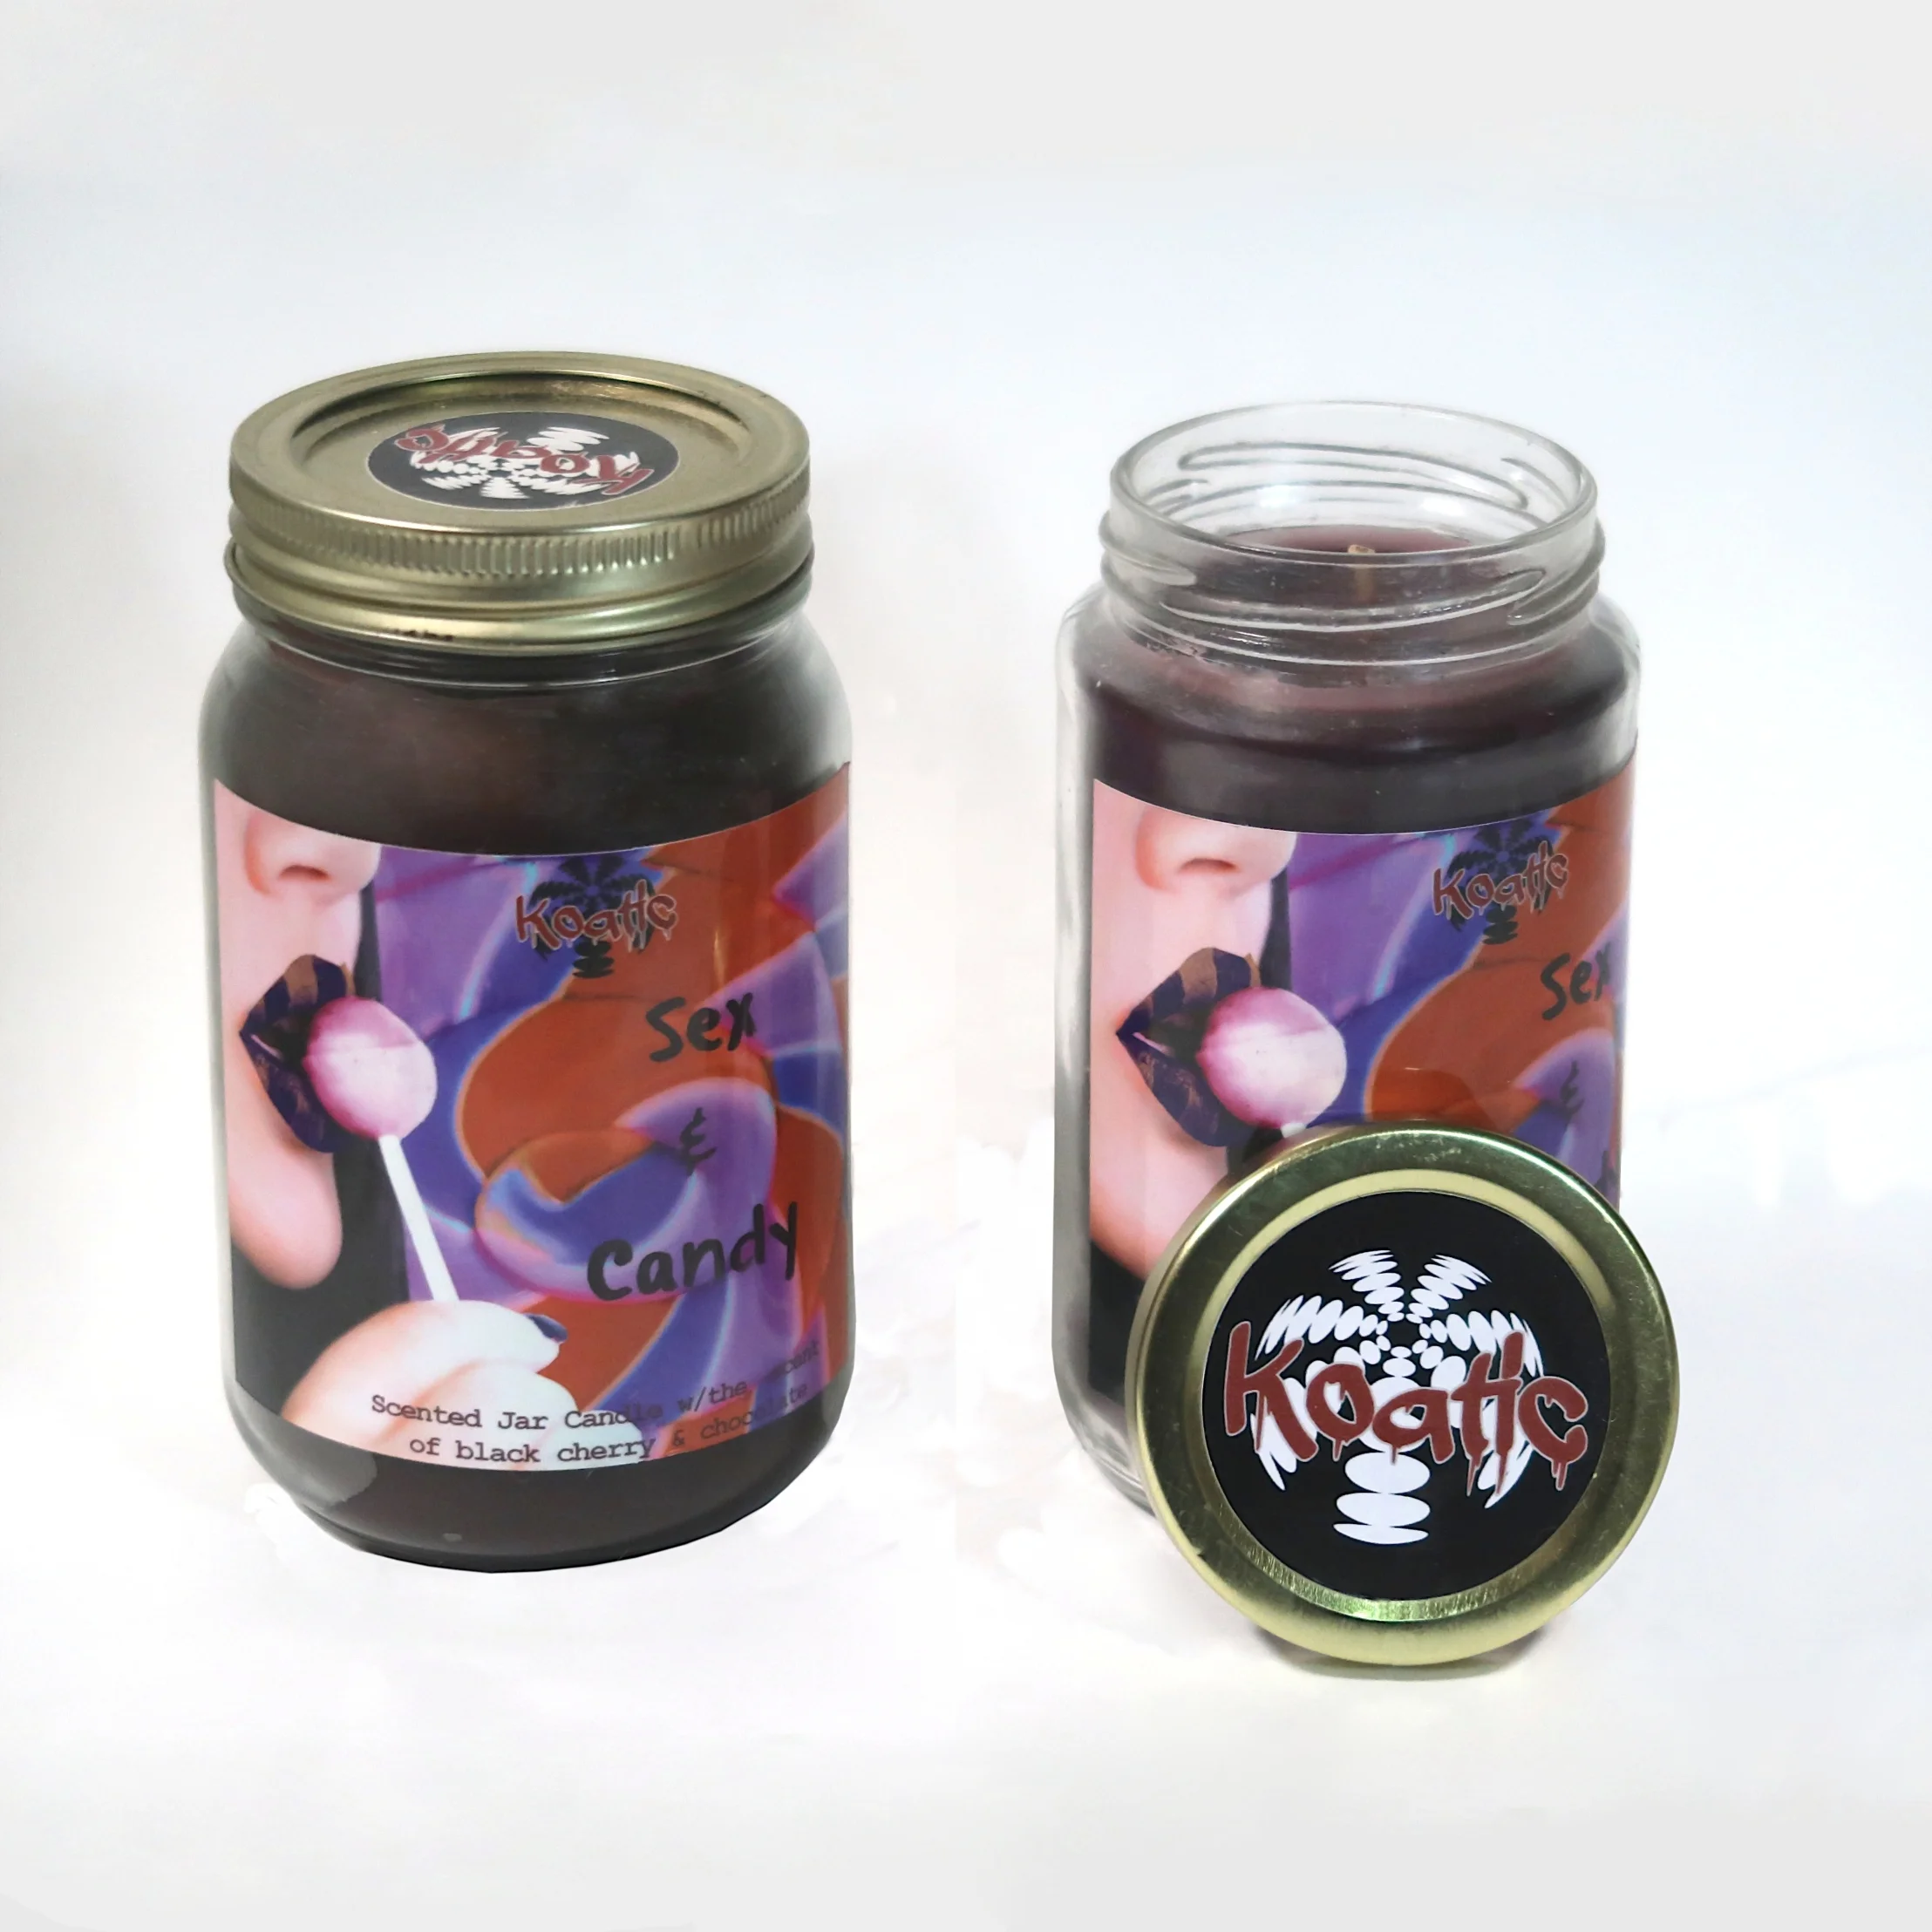 Sex and Candy Jar Candle - $20.00+